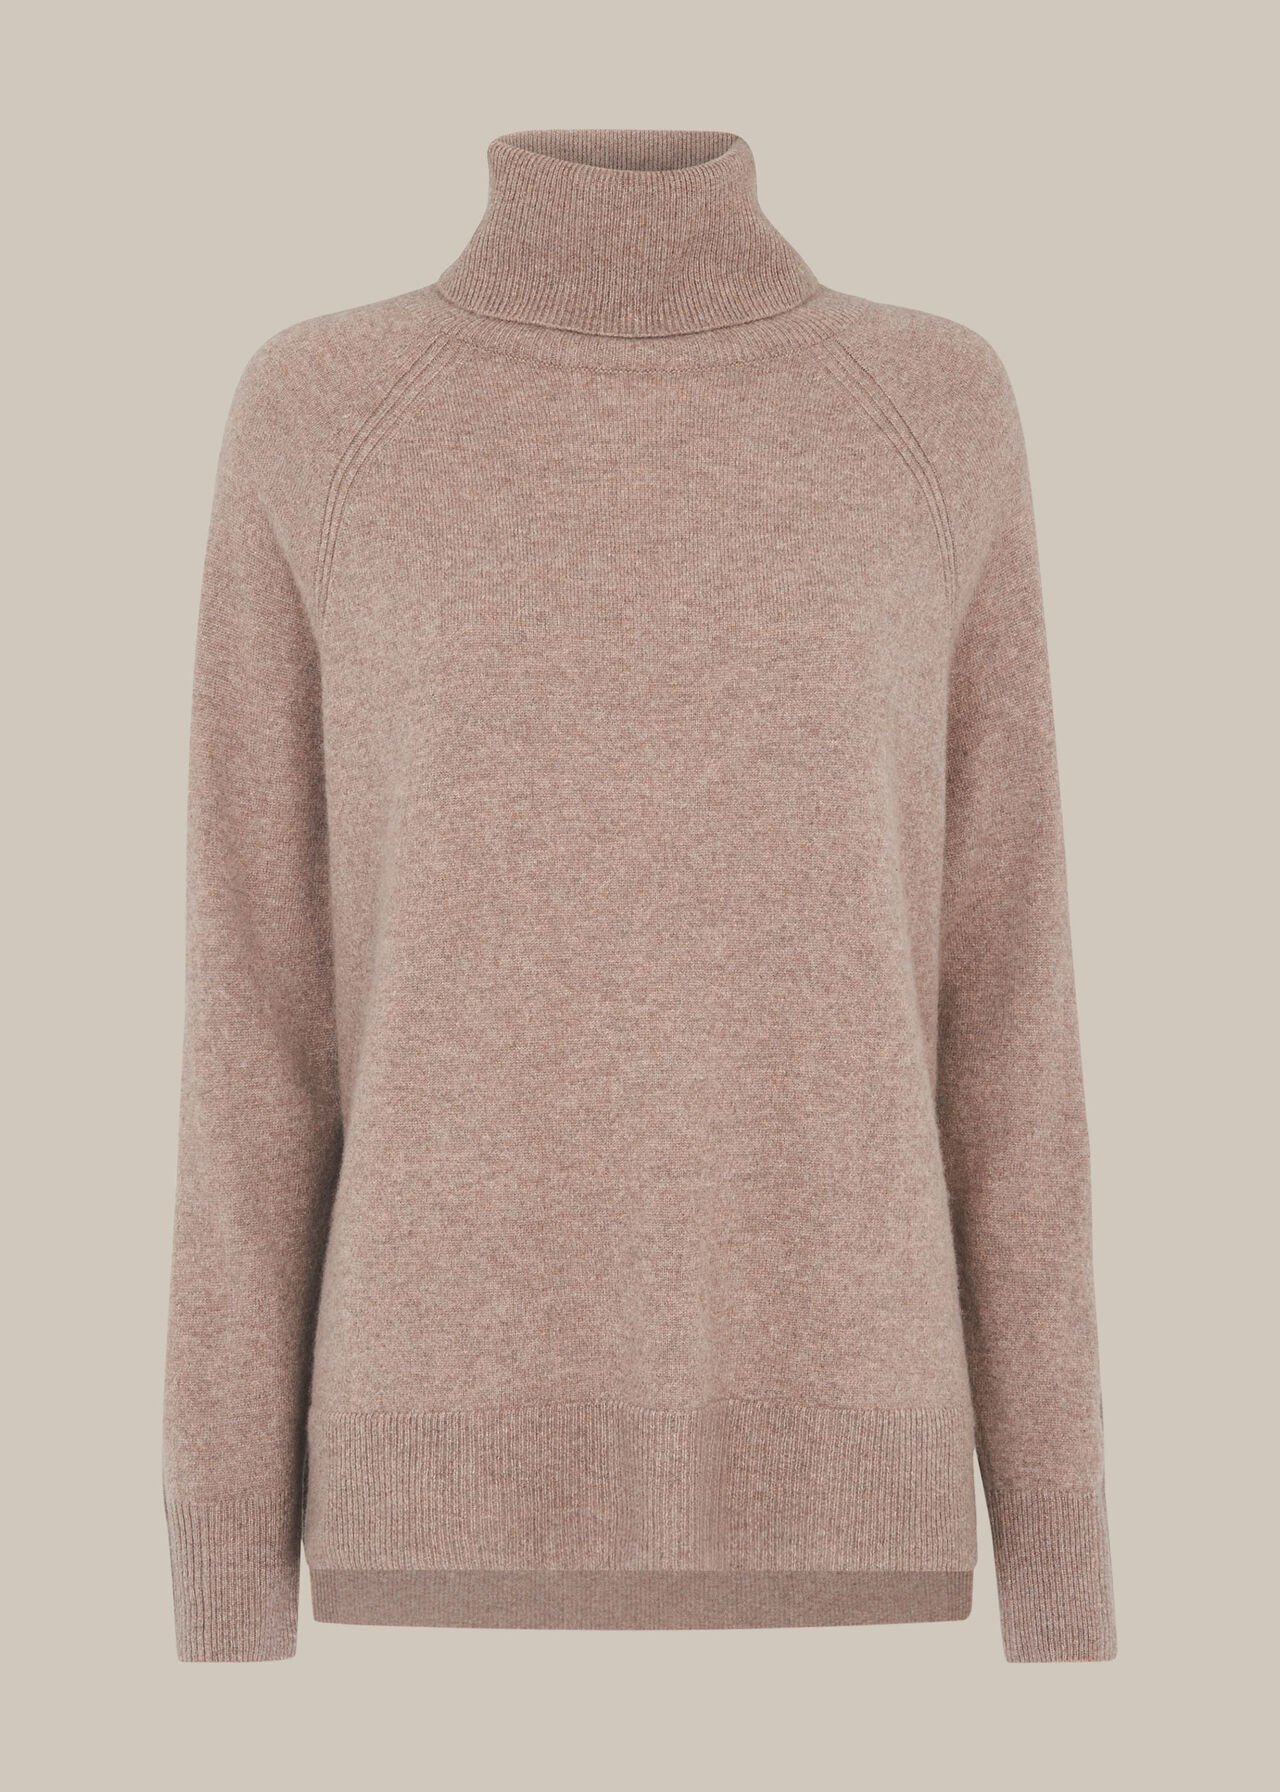 Oatmeal Cashmere Roll Neck Knit | WHISTLES